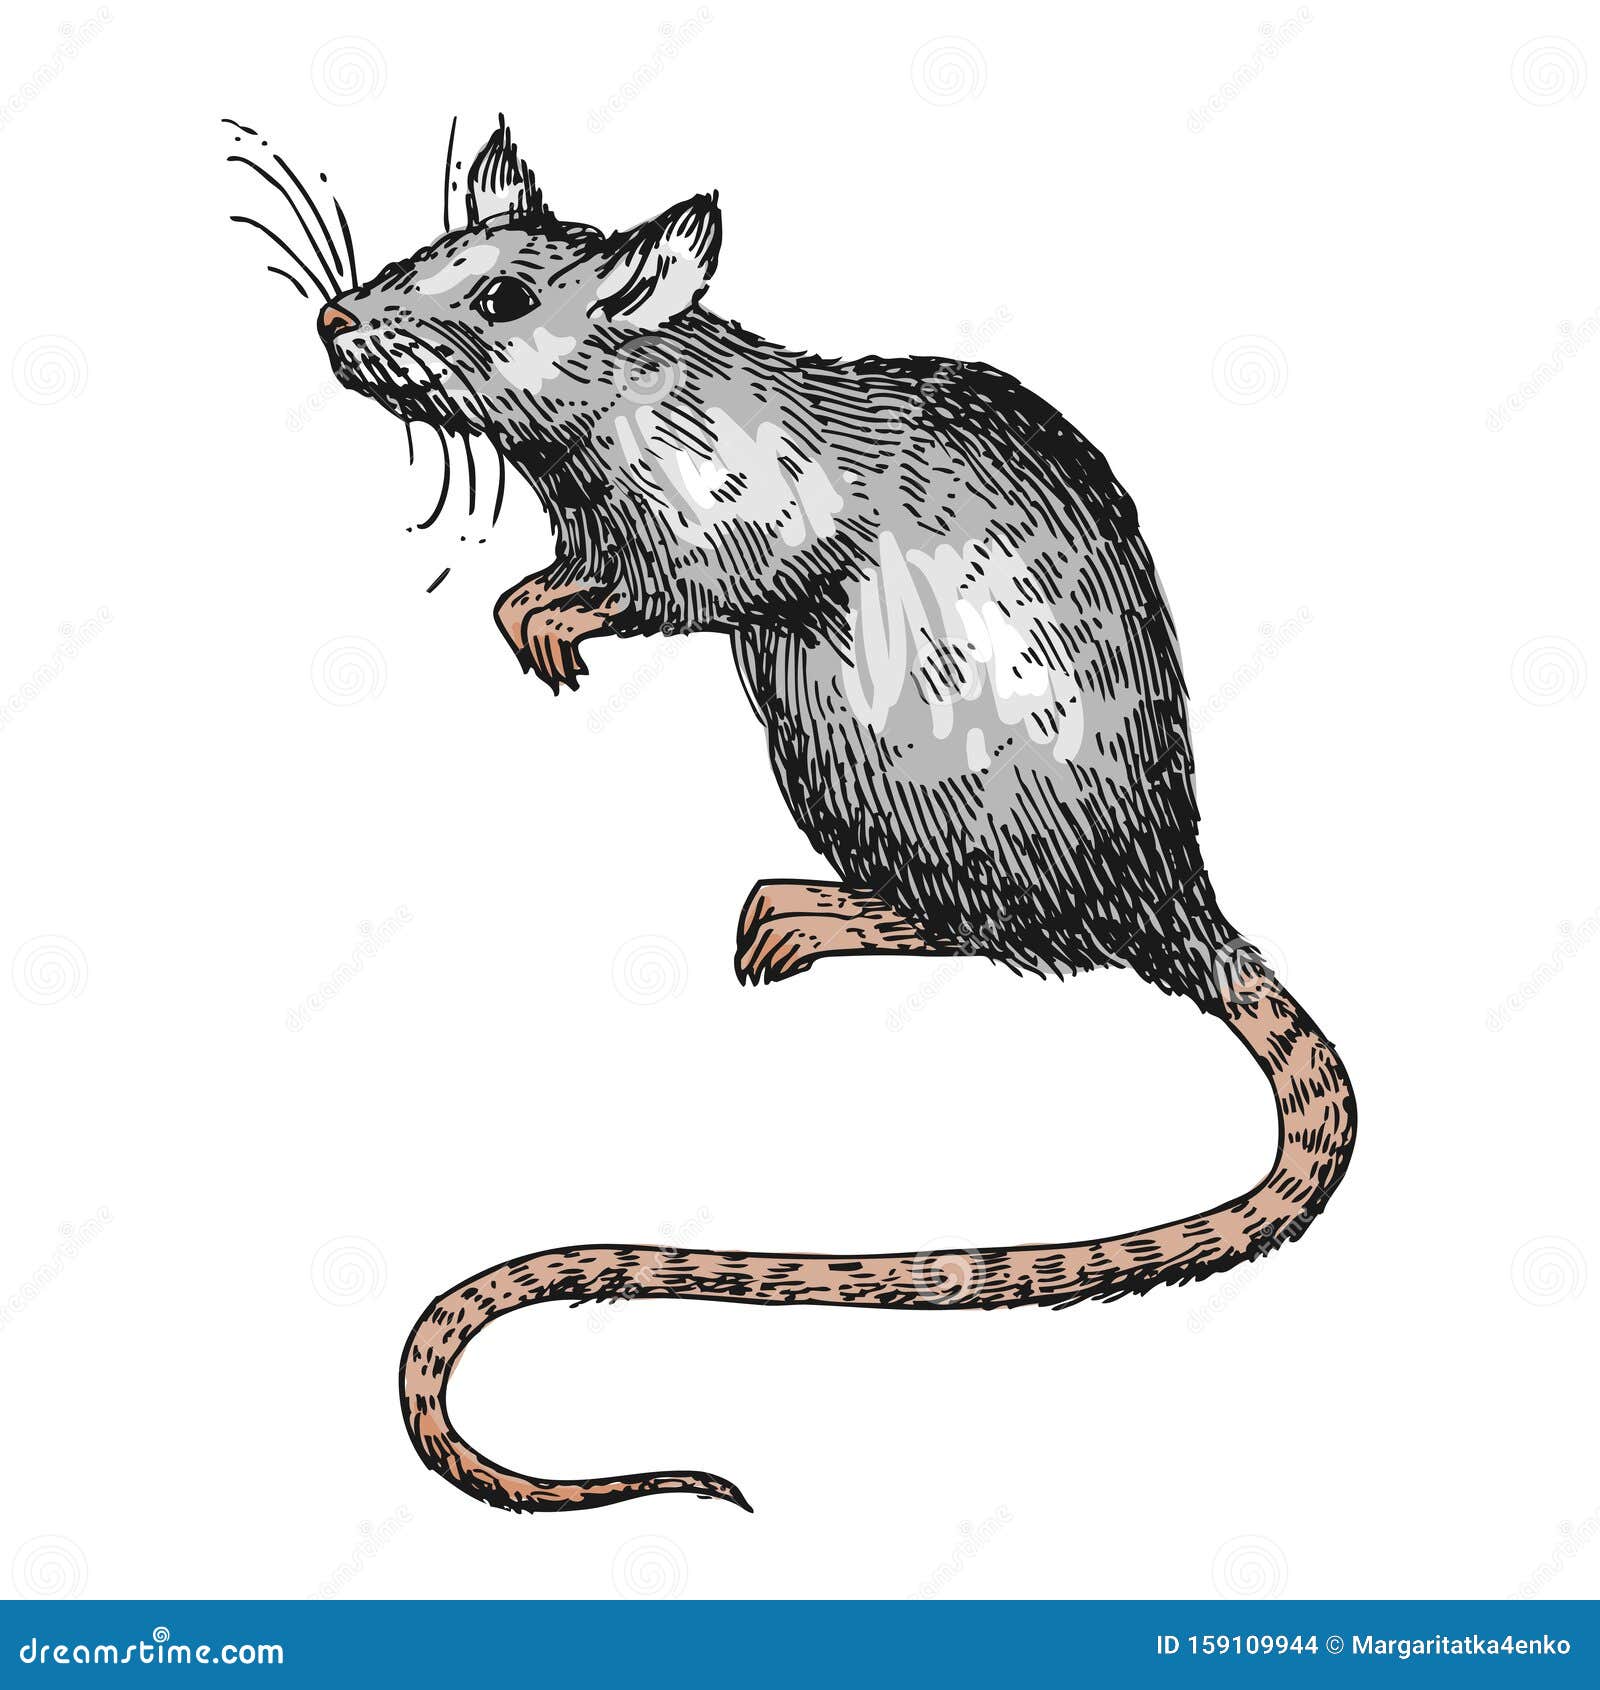 Drawing Outline Rat Vector Images over 1500